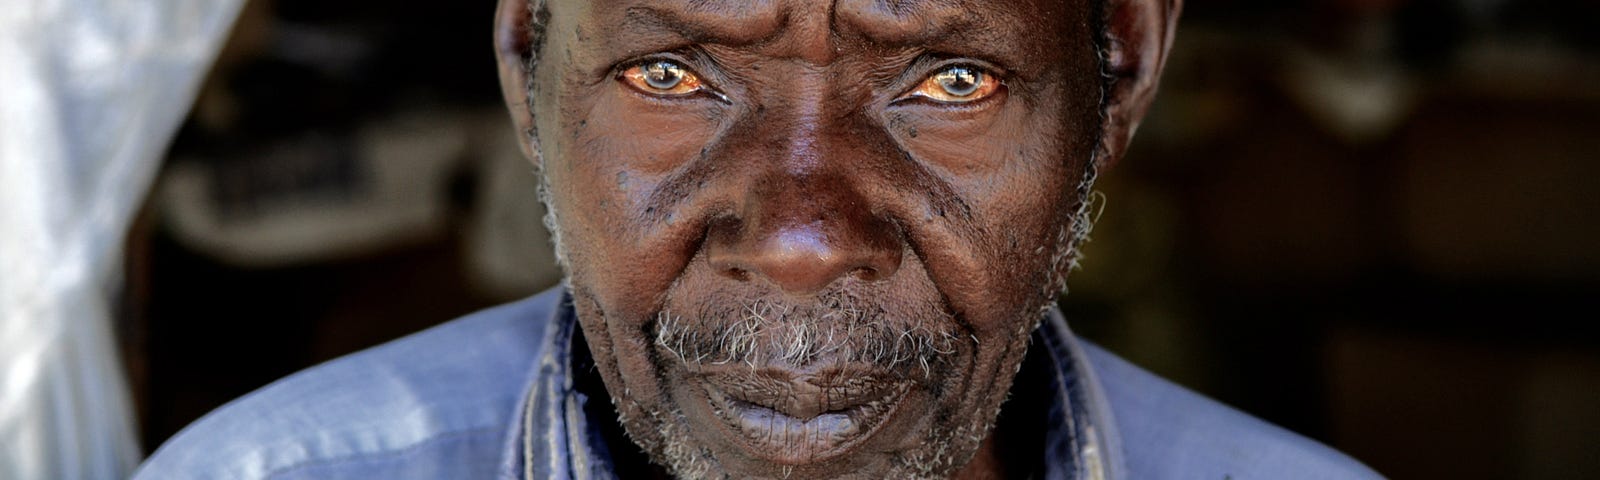 old African man